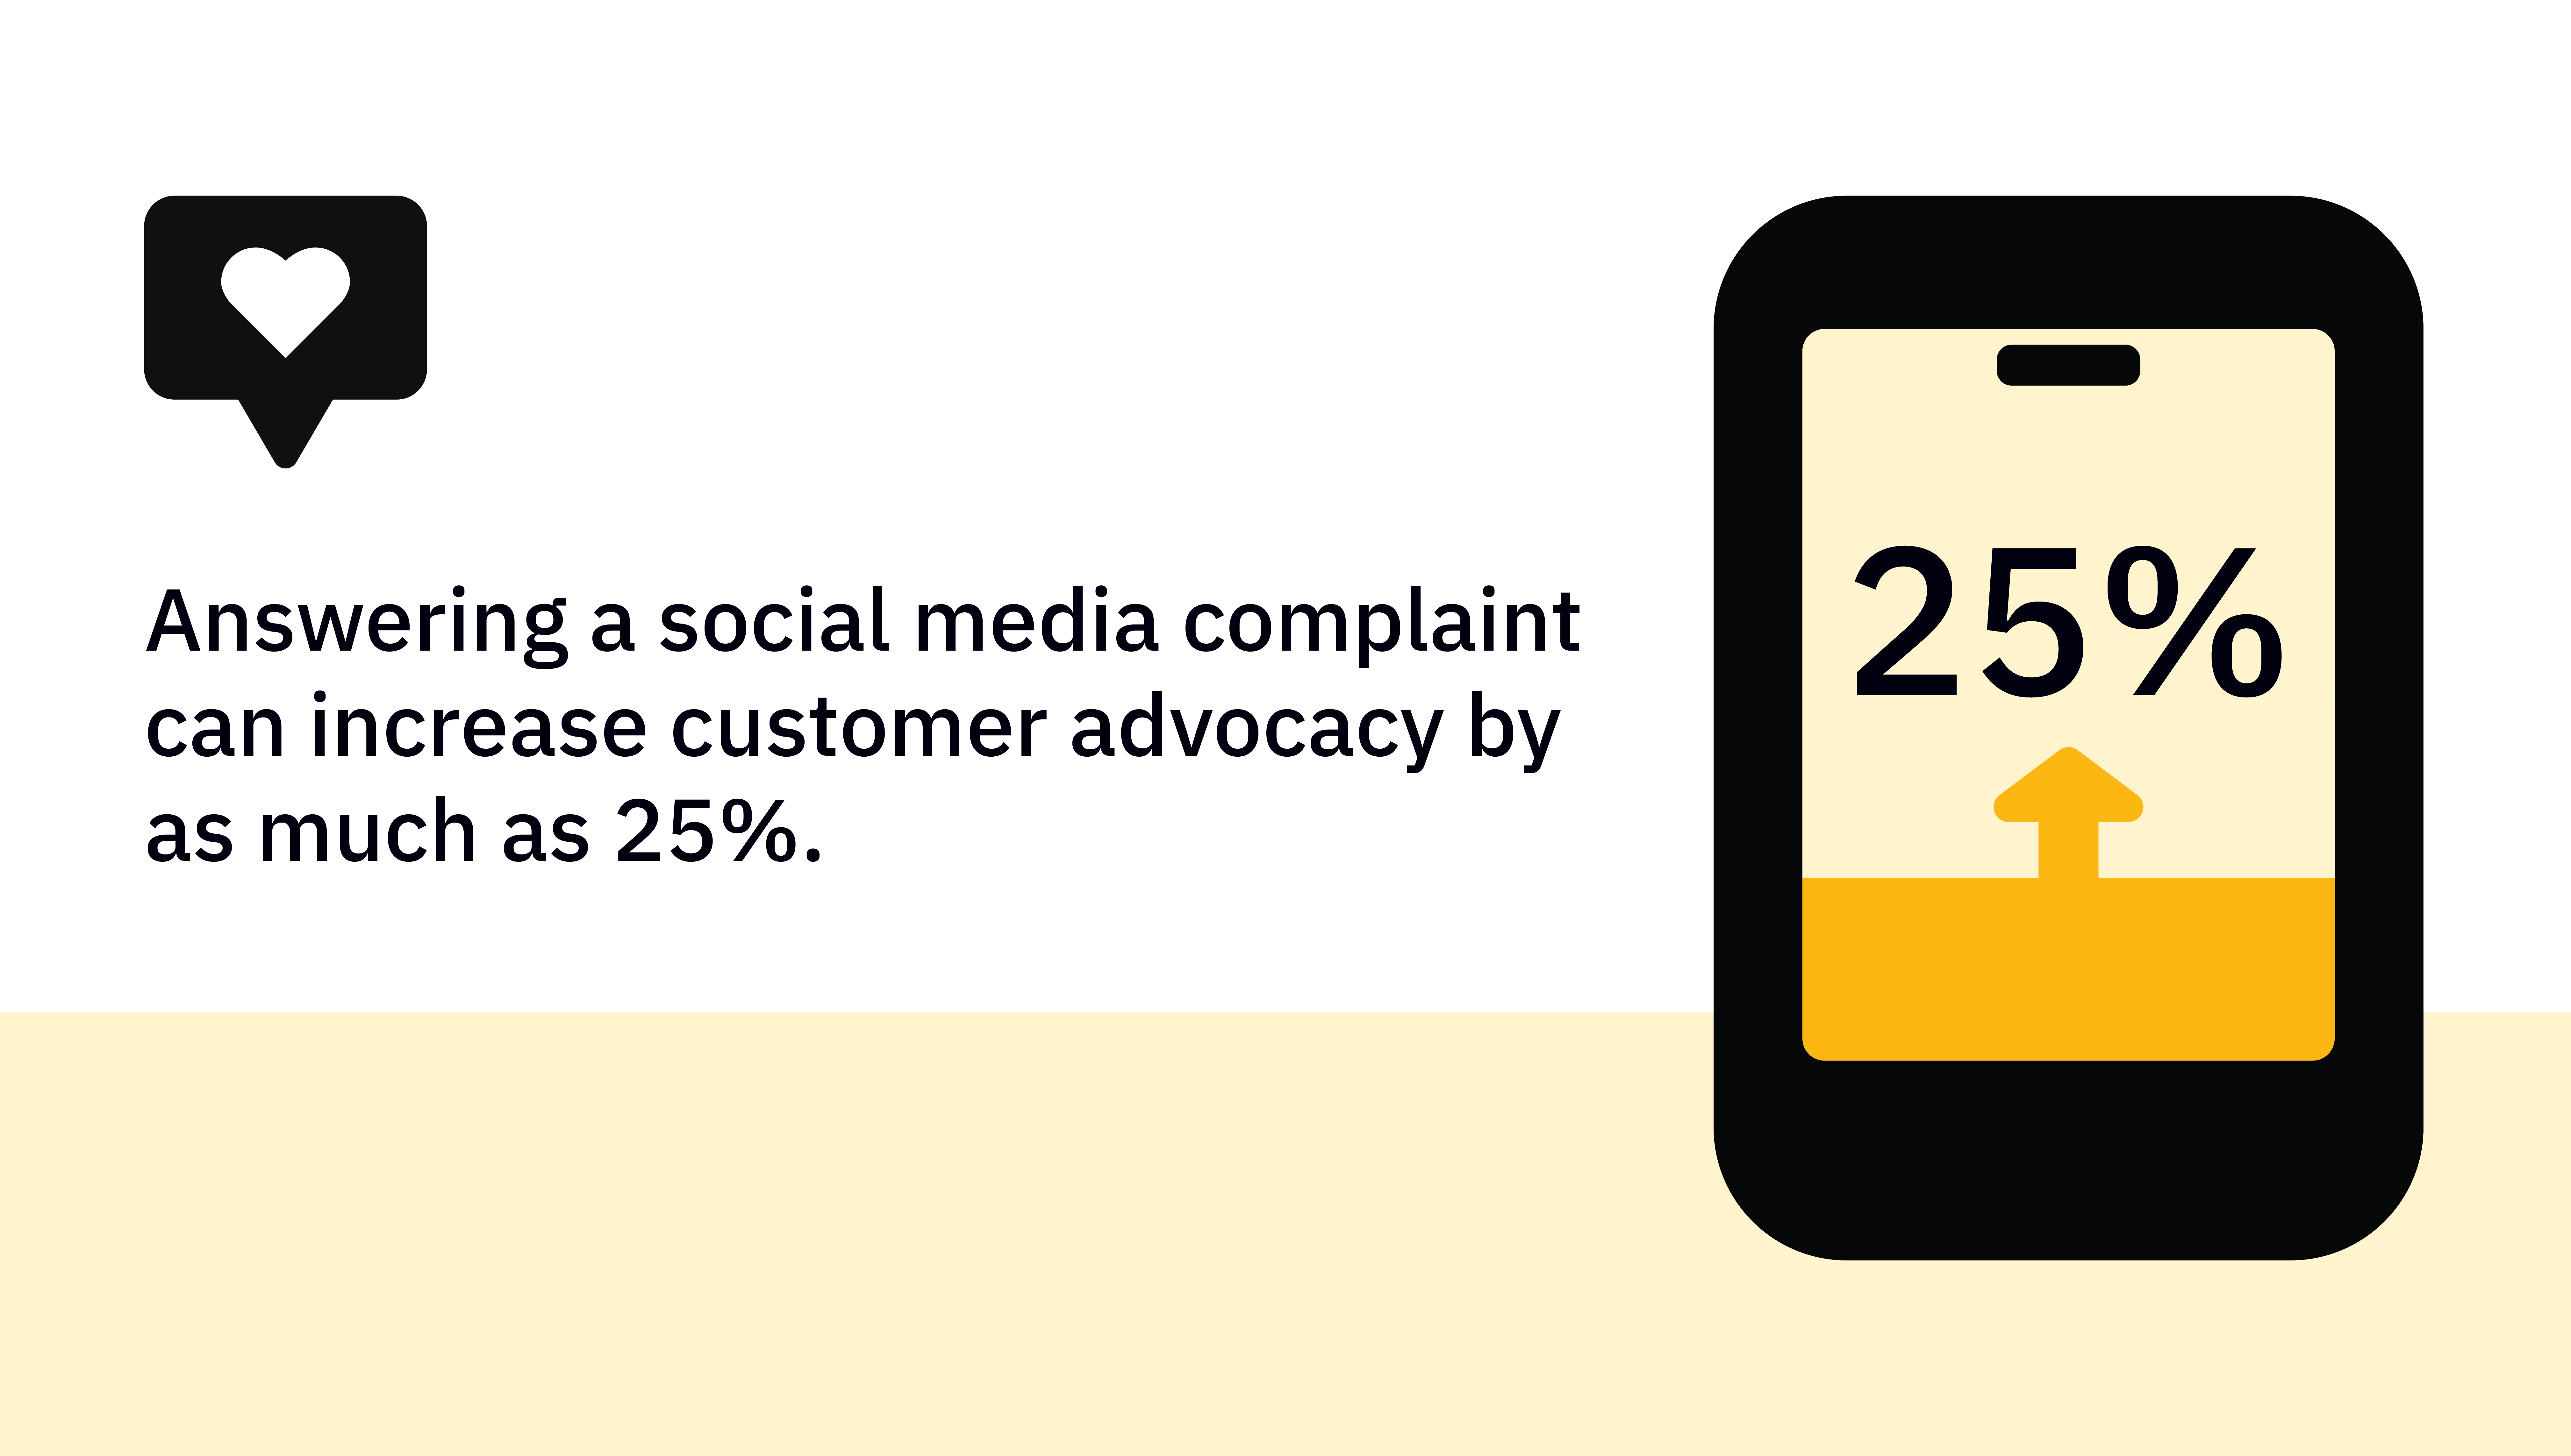 Answer social media complaints can increase customer advocacy by 25%